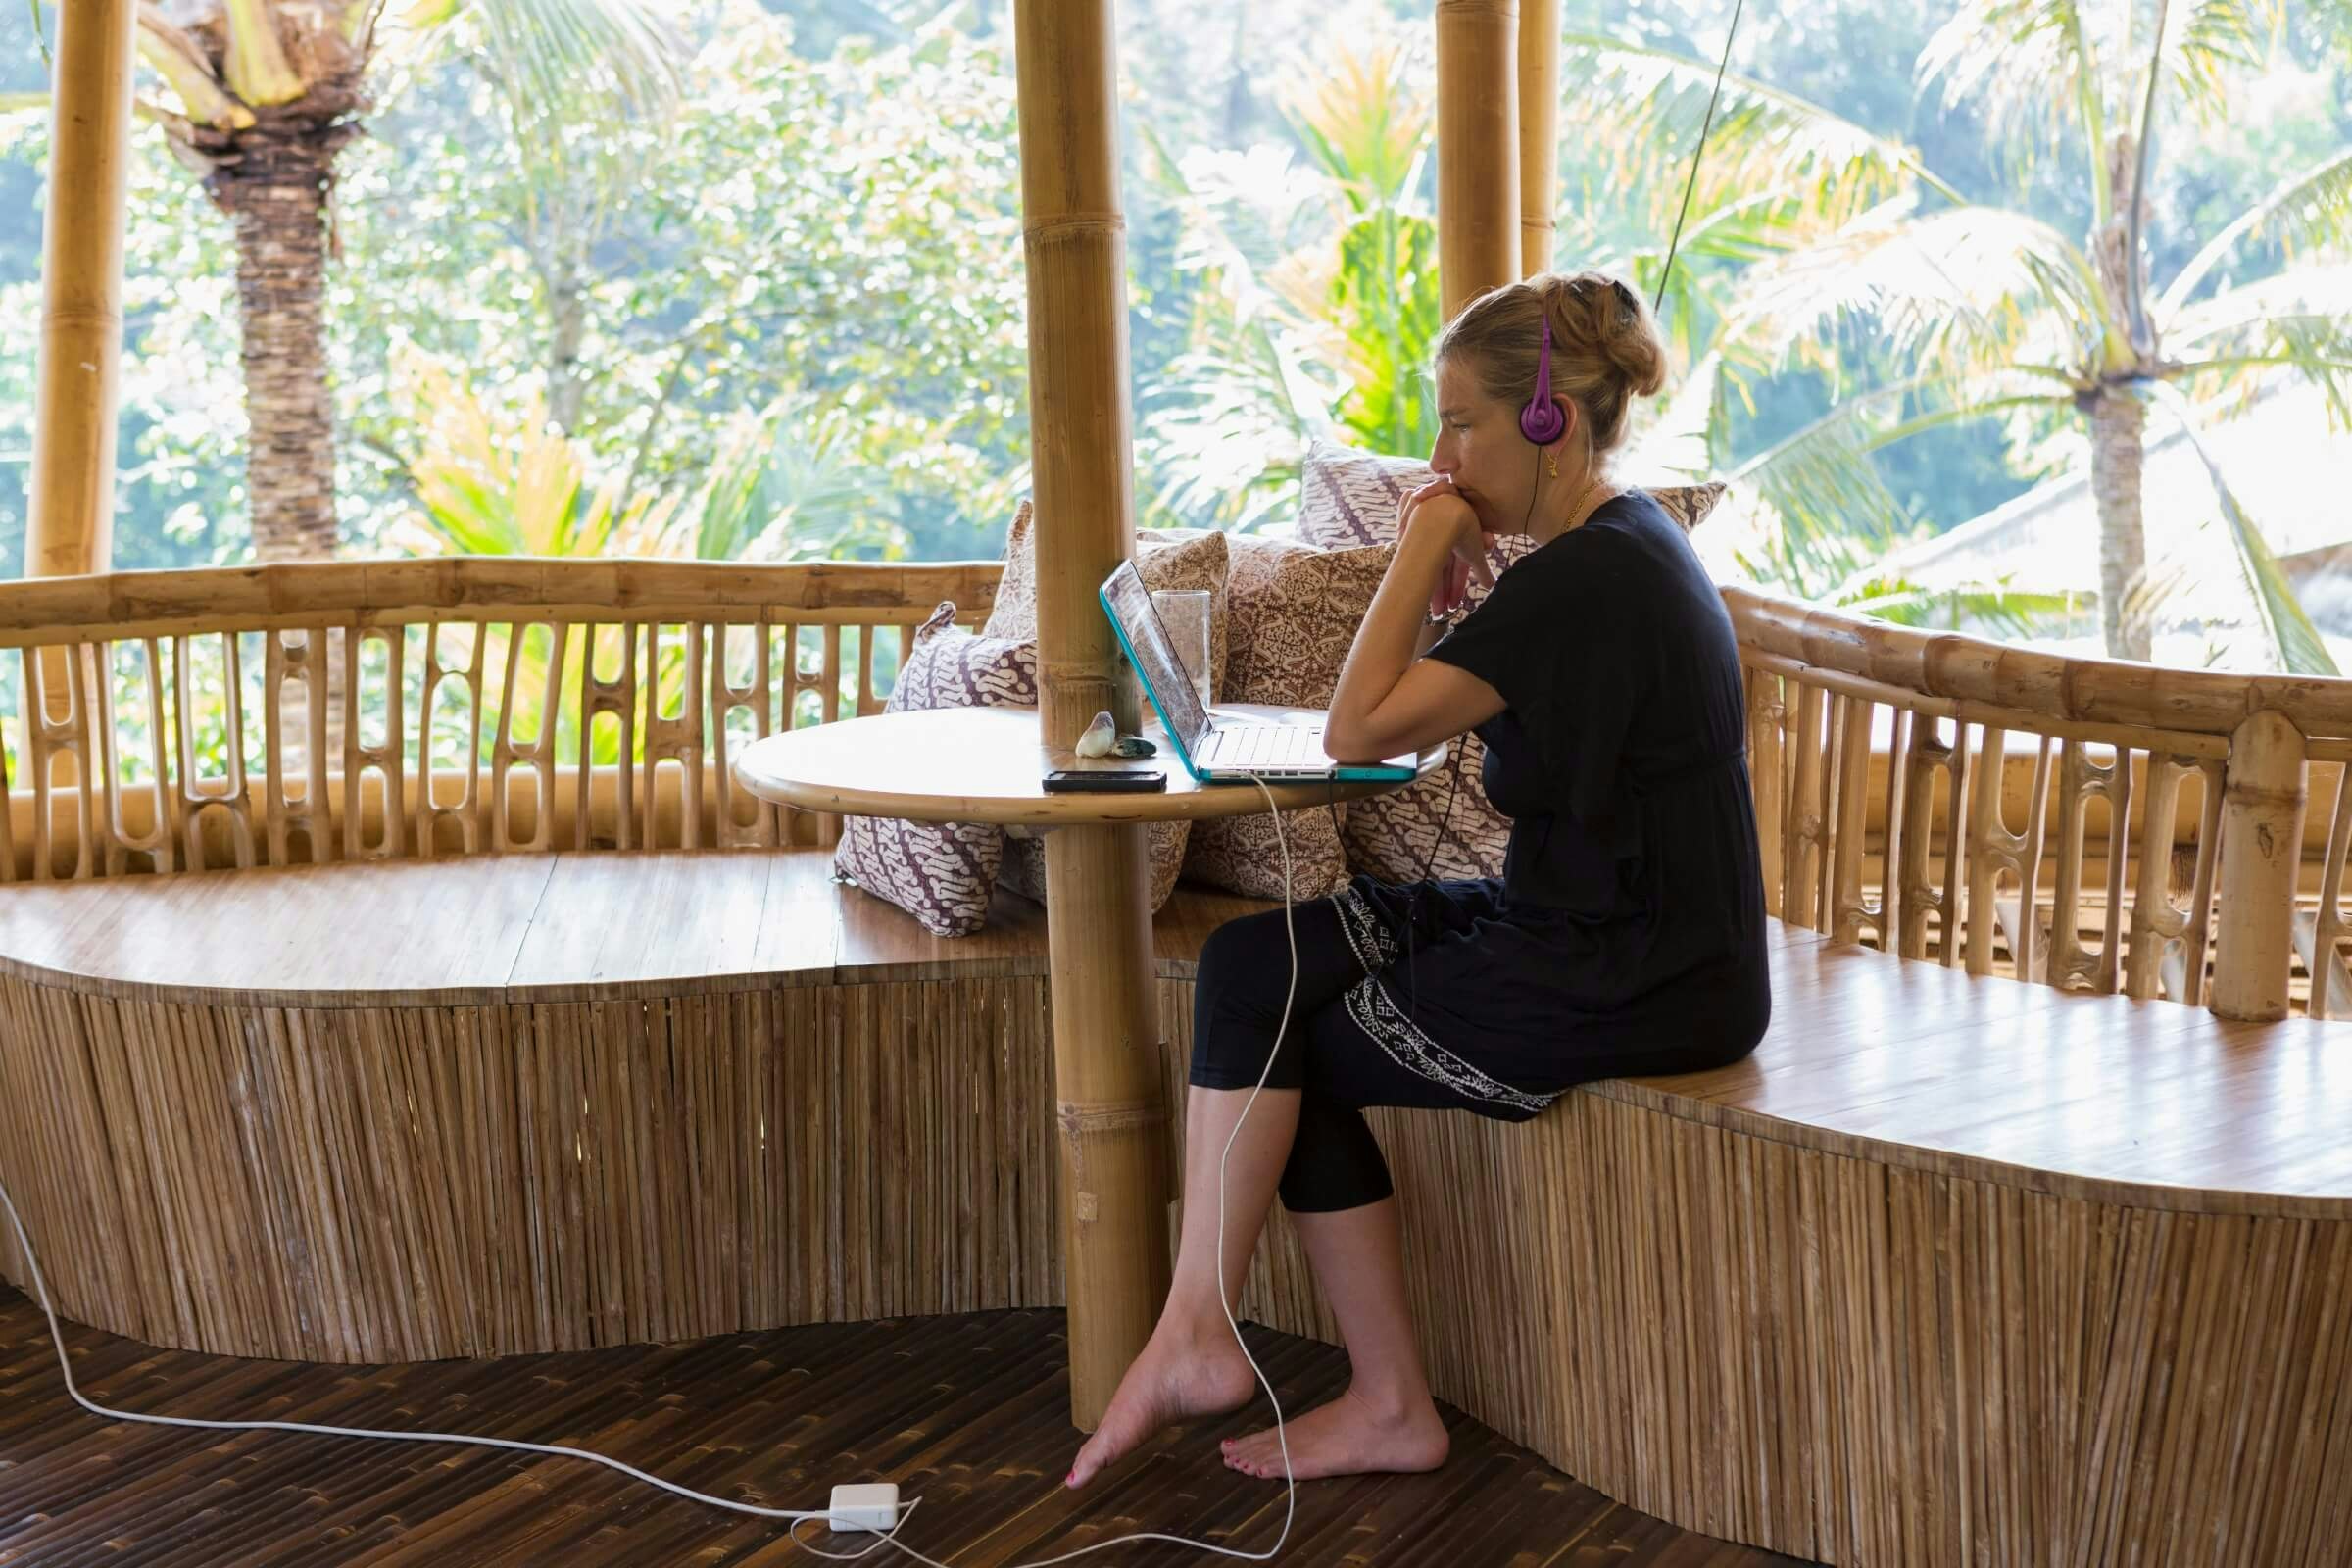 A woman using a laptop and headphones on a bamboo patio on a sunny day